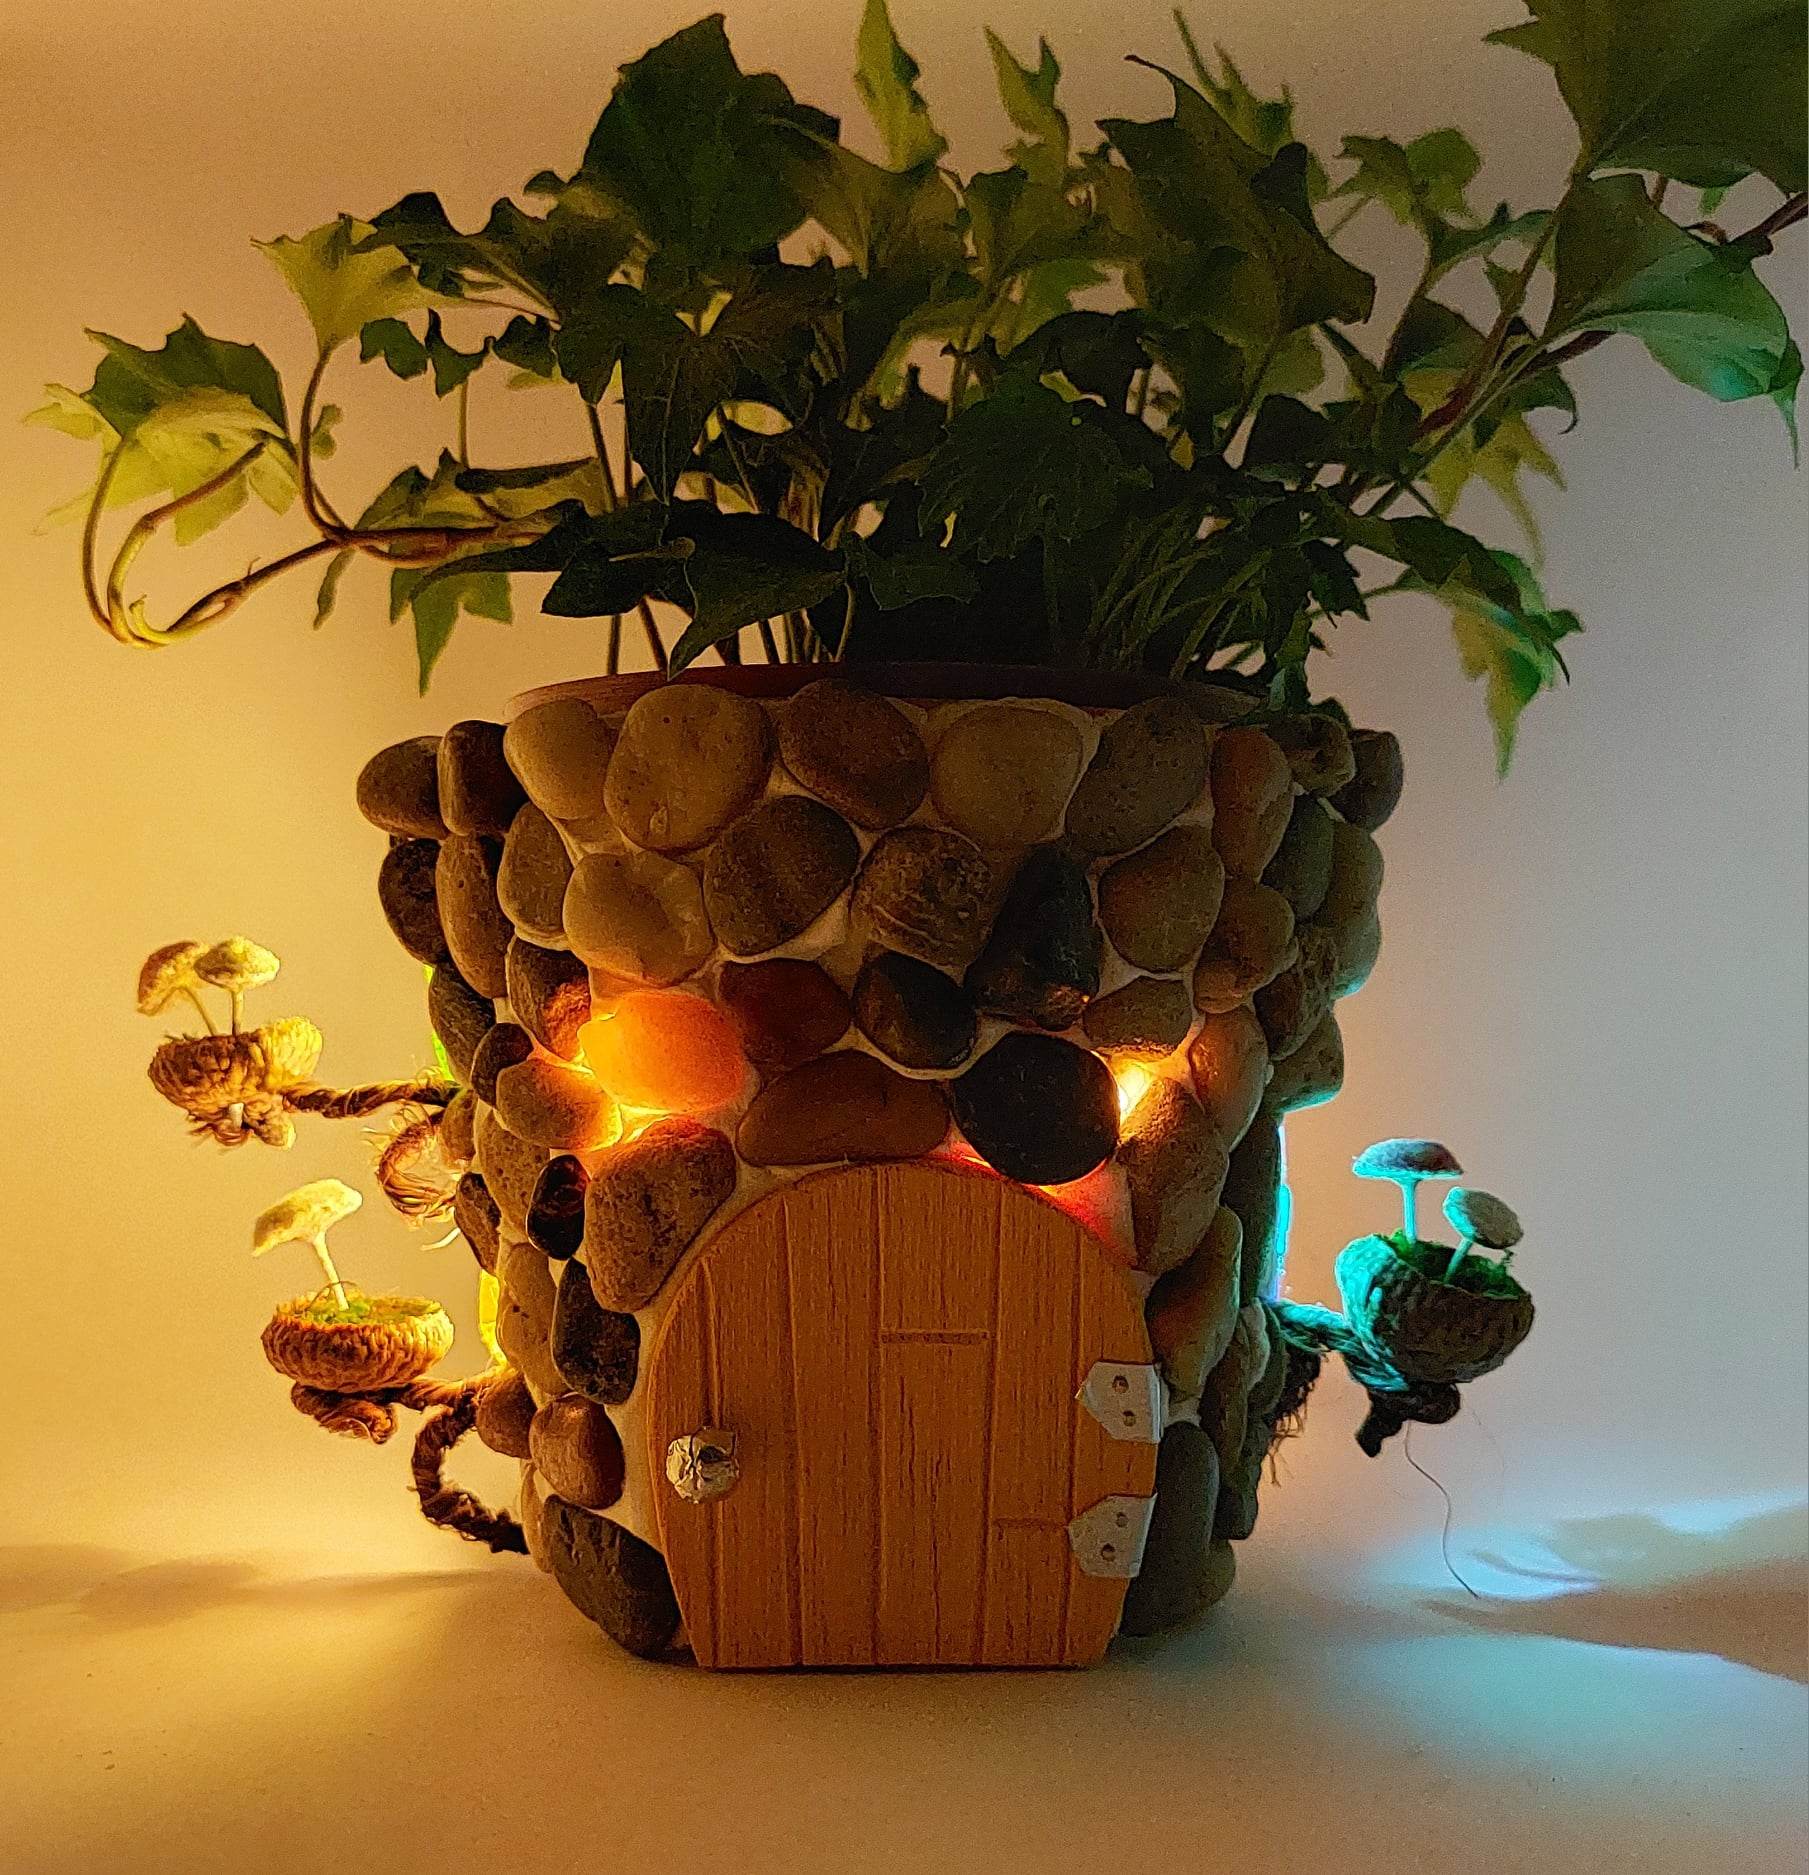 planter with lights and plants